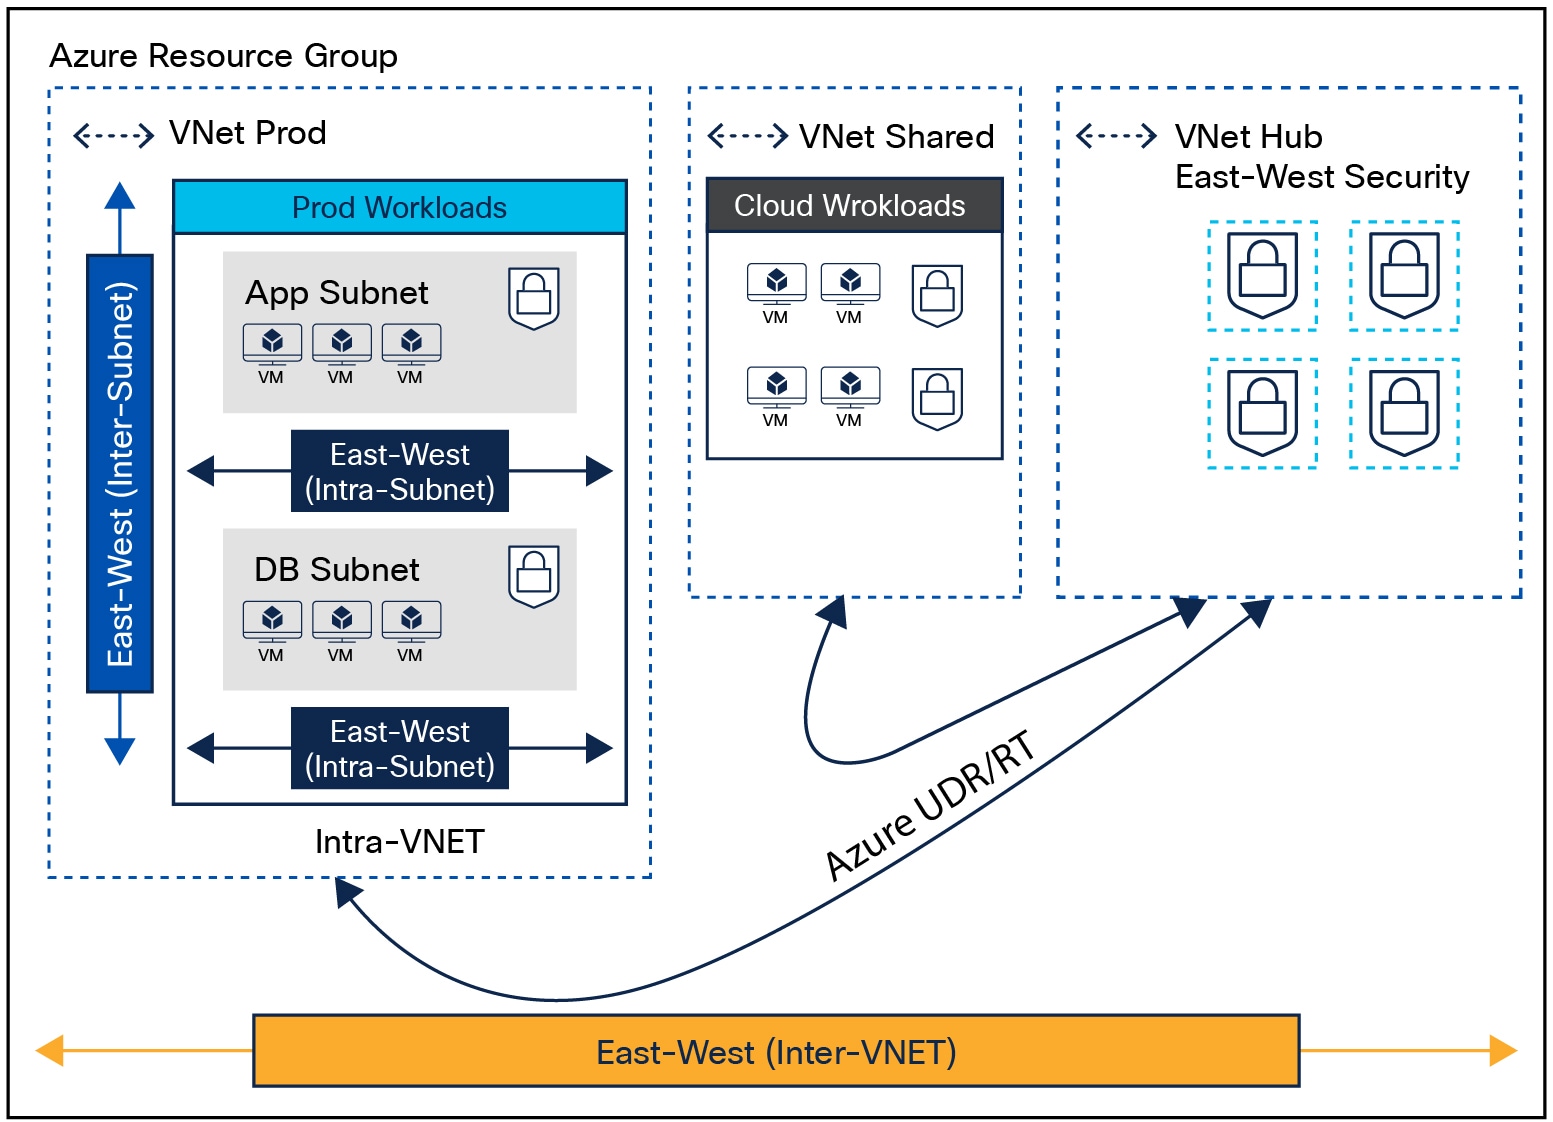 Network Microsegmentation for Cloud Agentless Workloads with Centralized/Hub VNet Secure Firewall Deployment on Azure